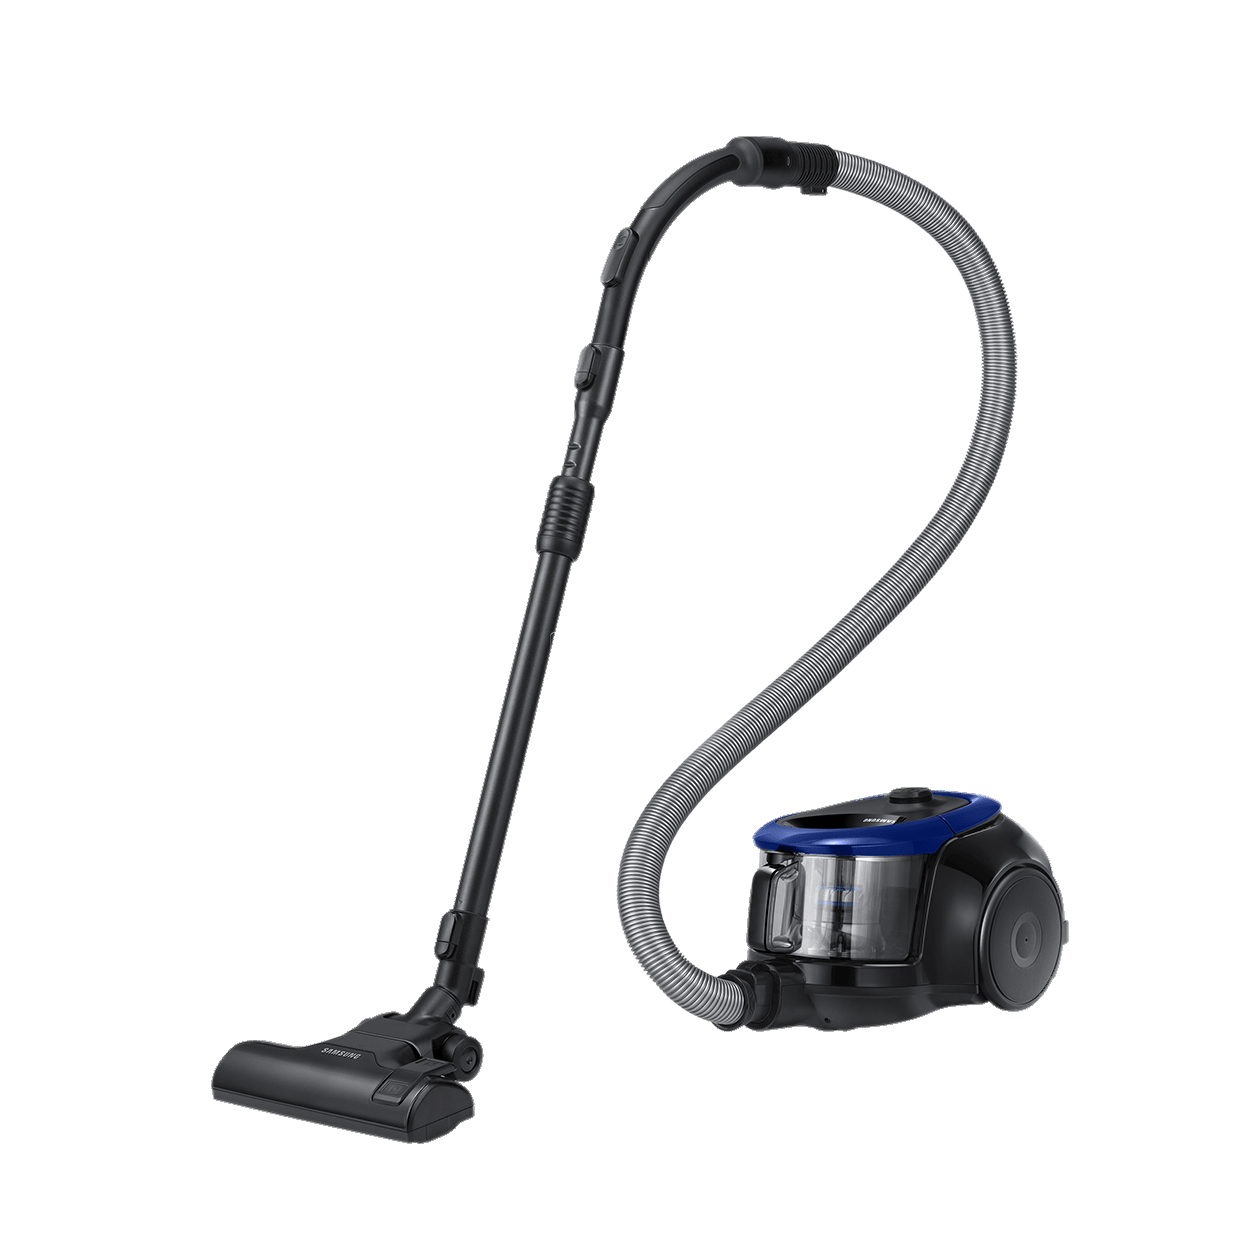 Vacuum Cleaner PNG Image in High Definition pngteam.com